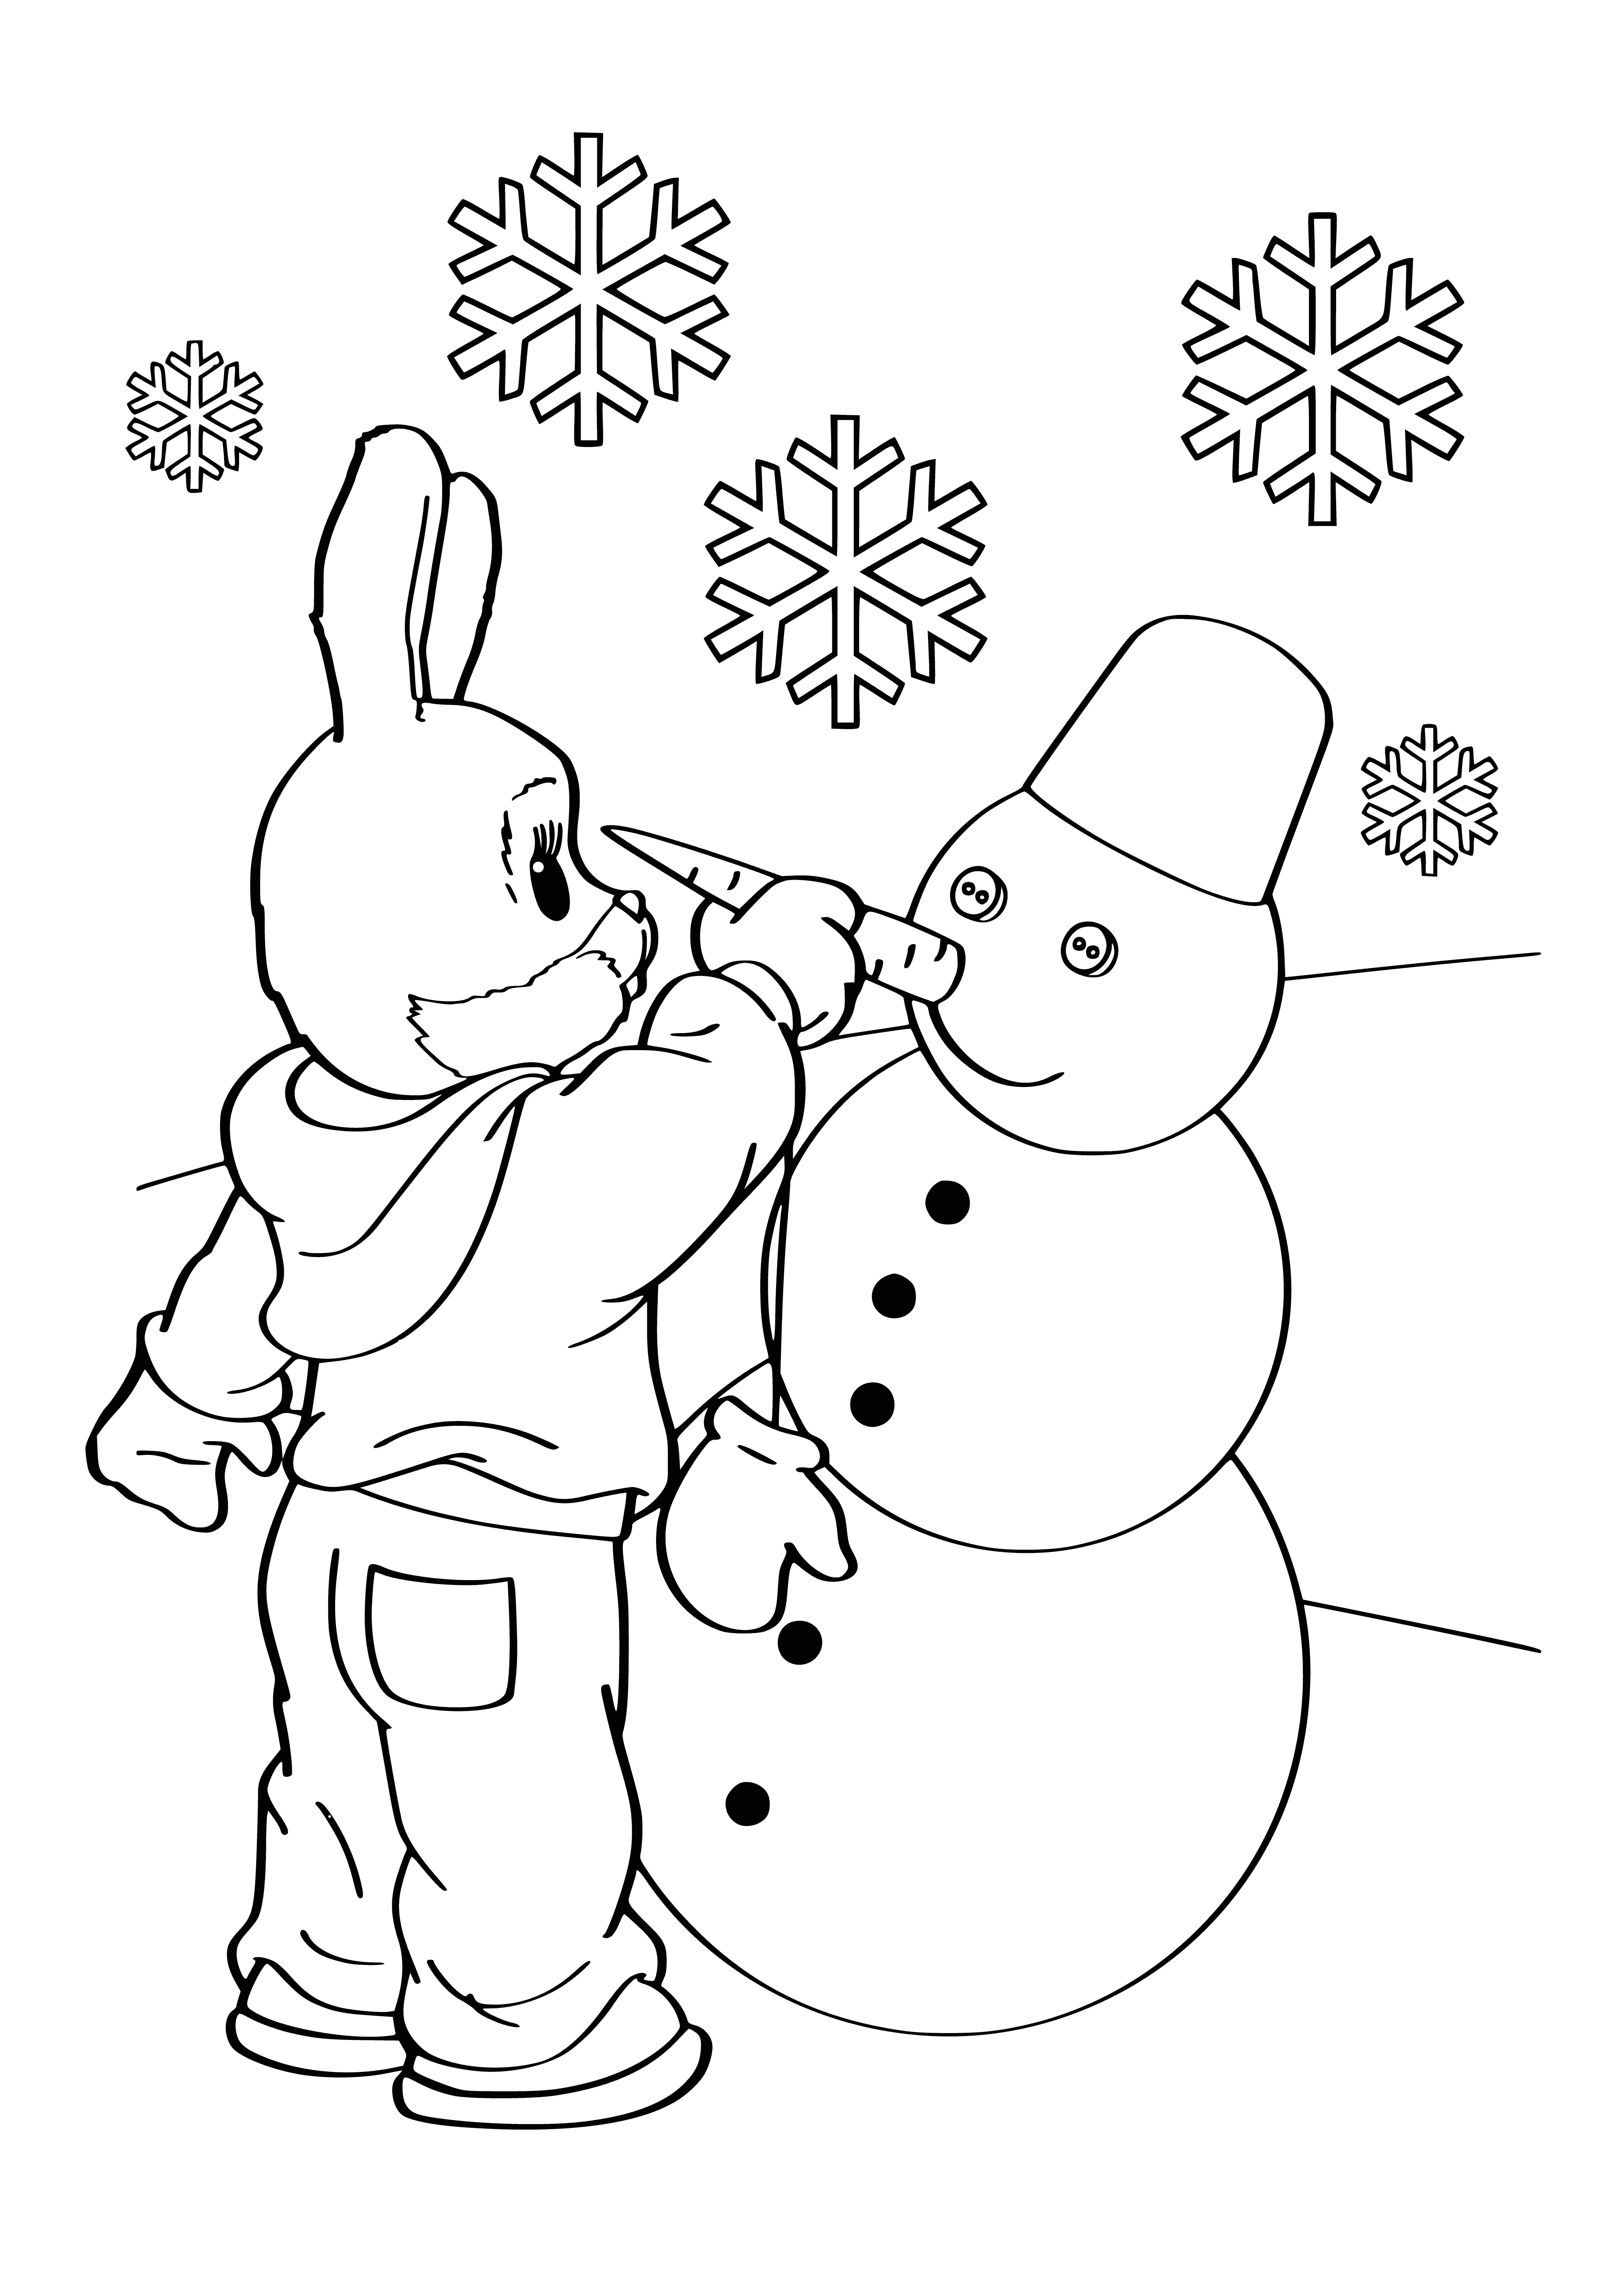 coloring page: Woman stands in front of smiling children, saying: "Good night, children!"